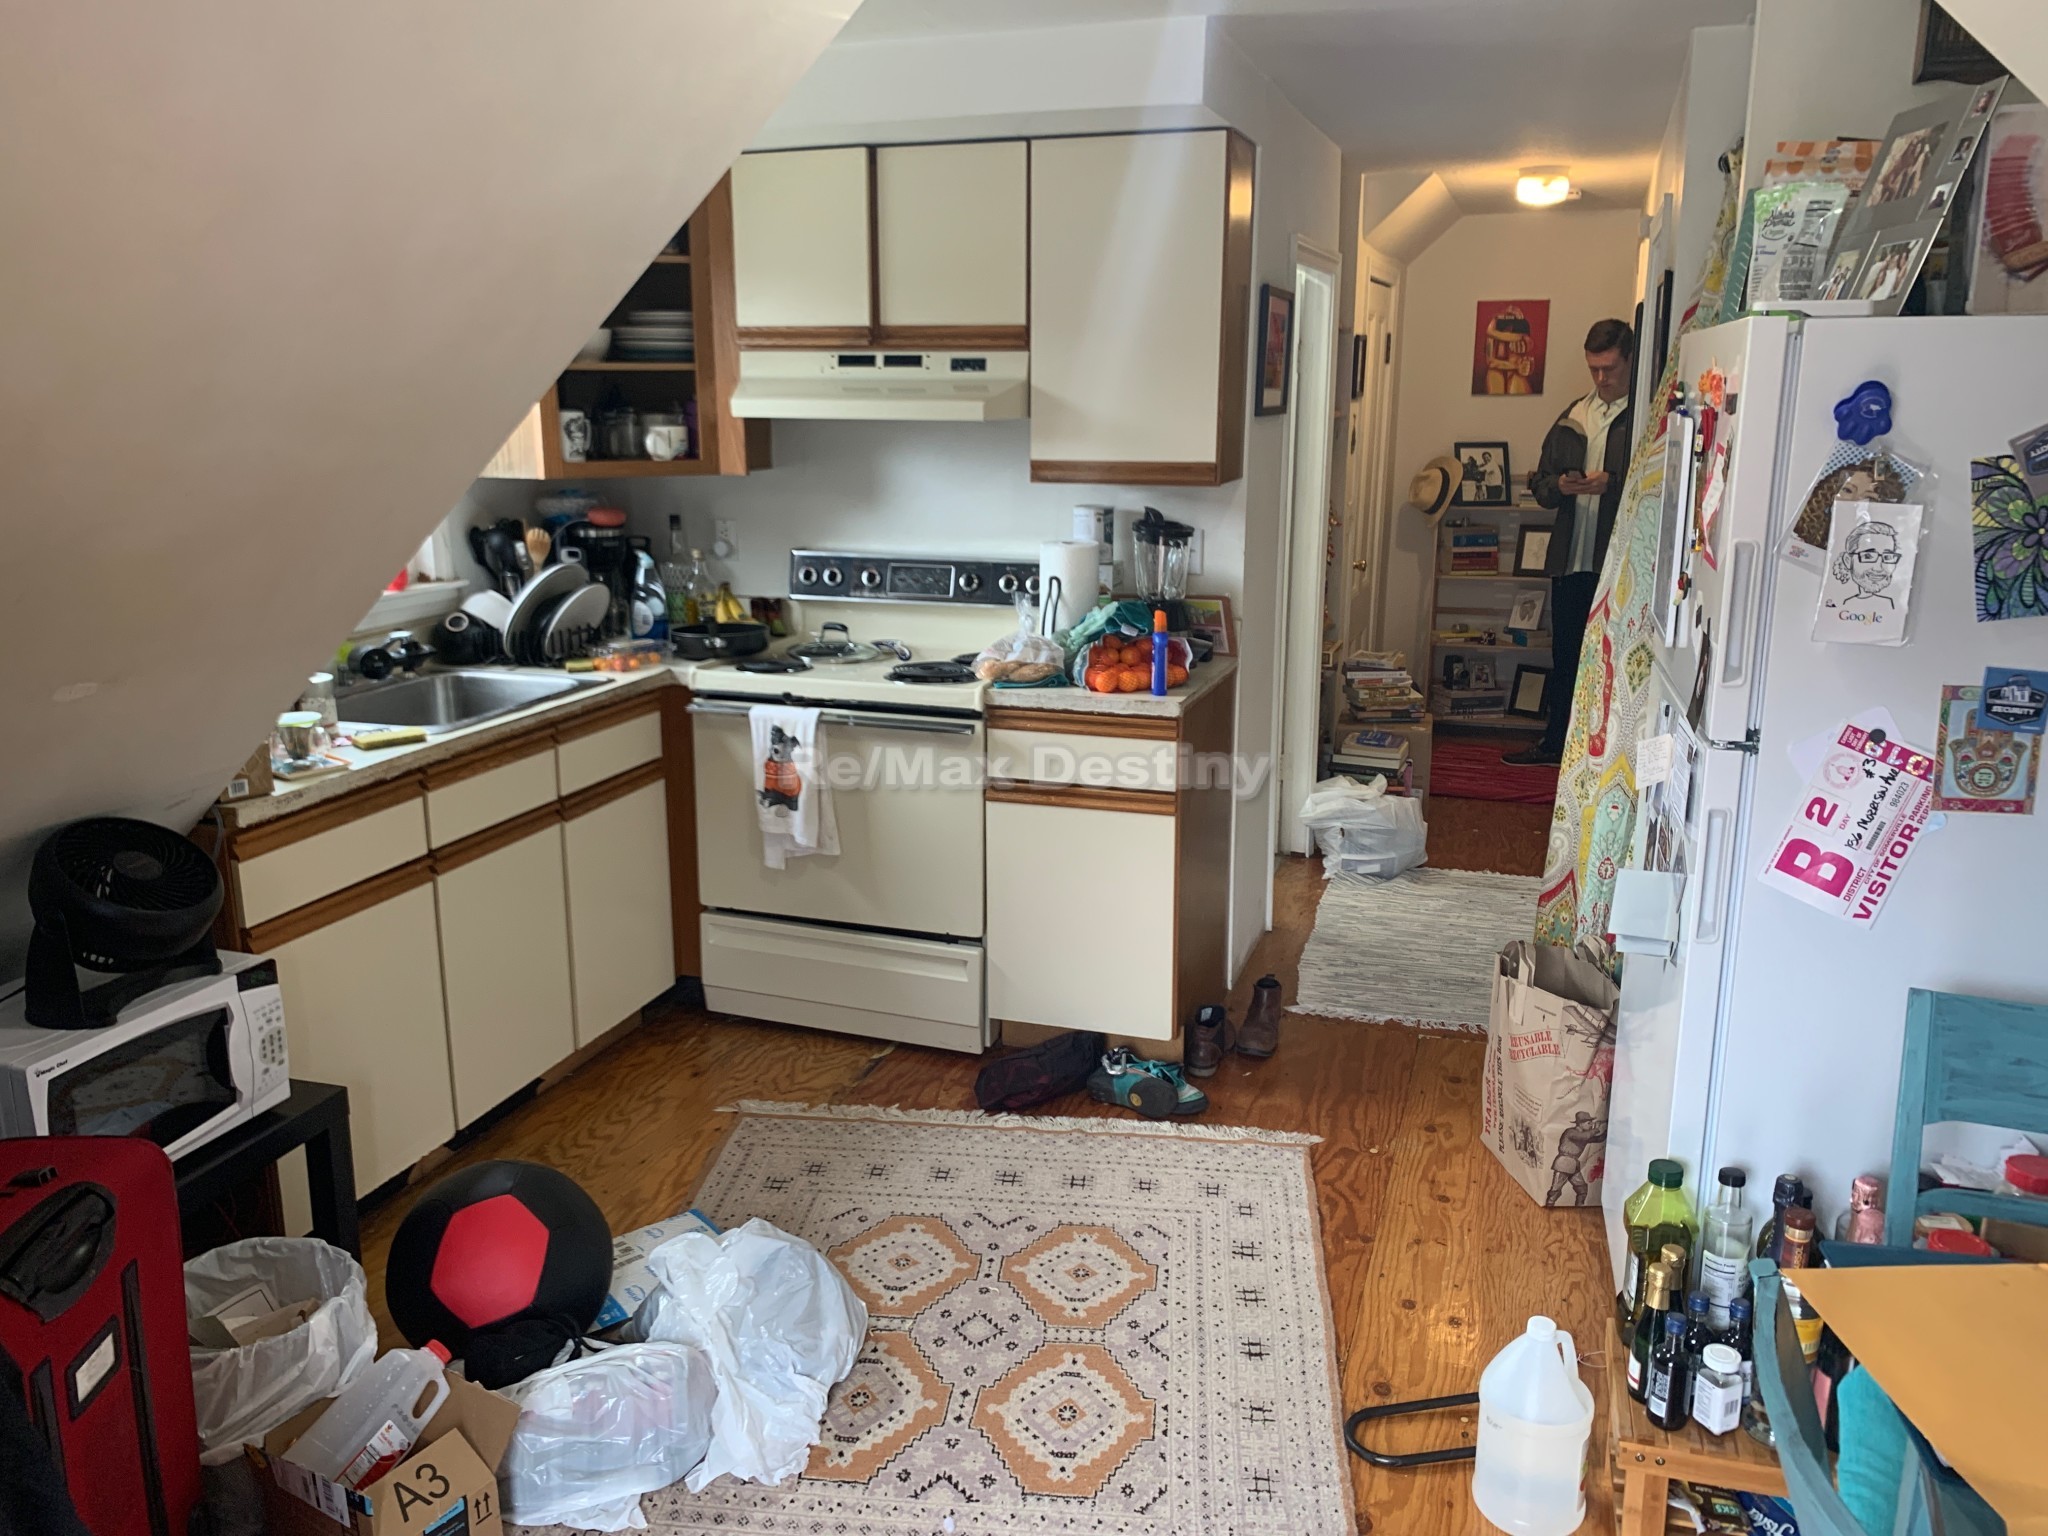 Photos of apartment on Morrison,Somerville MA 02144